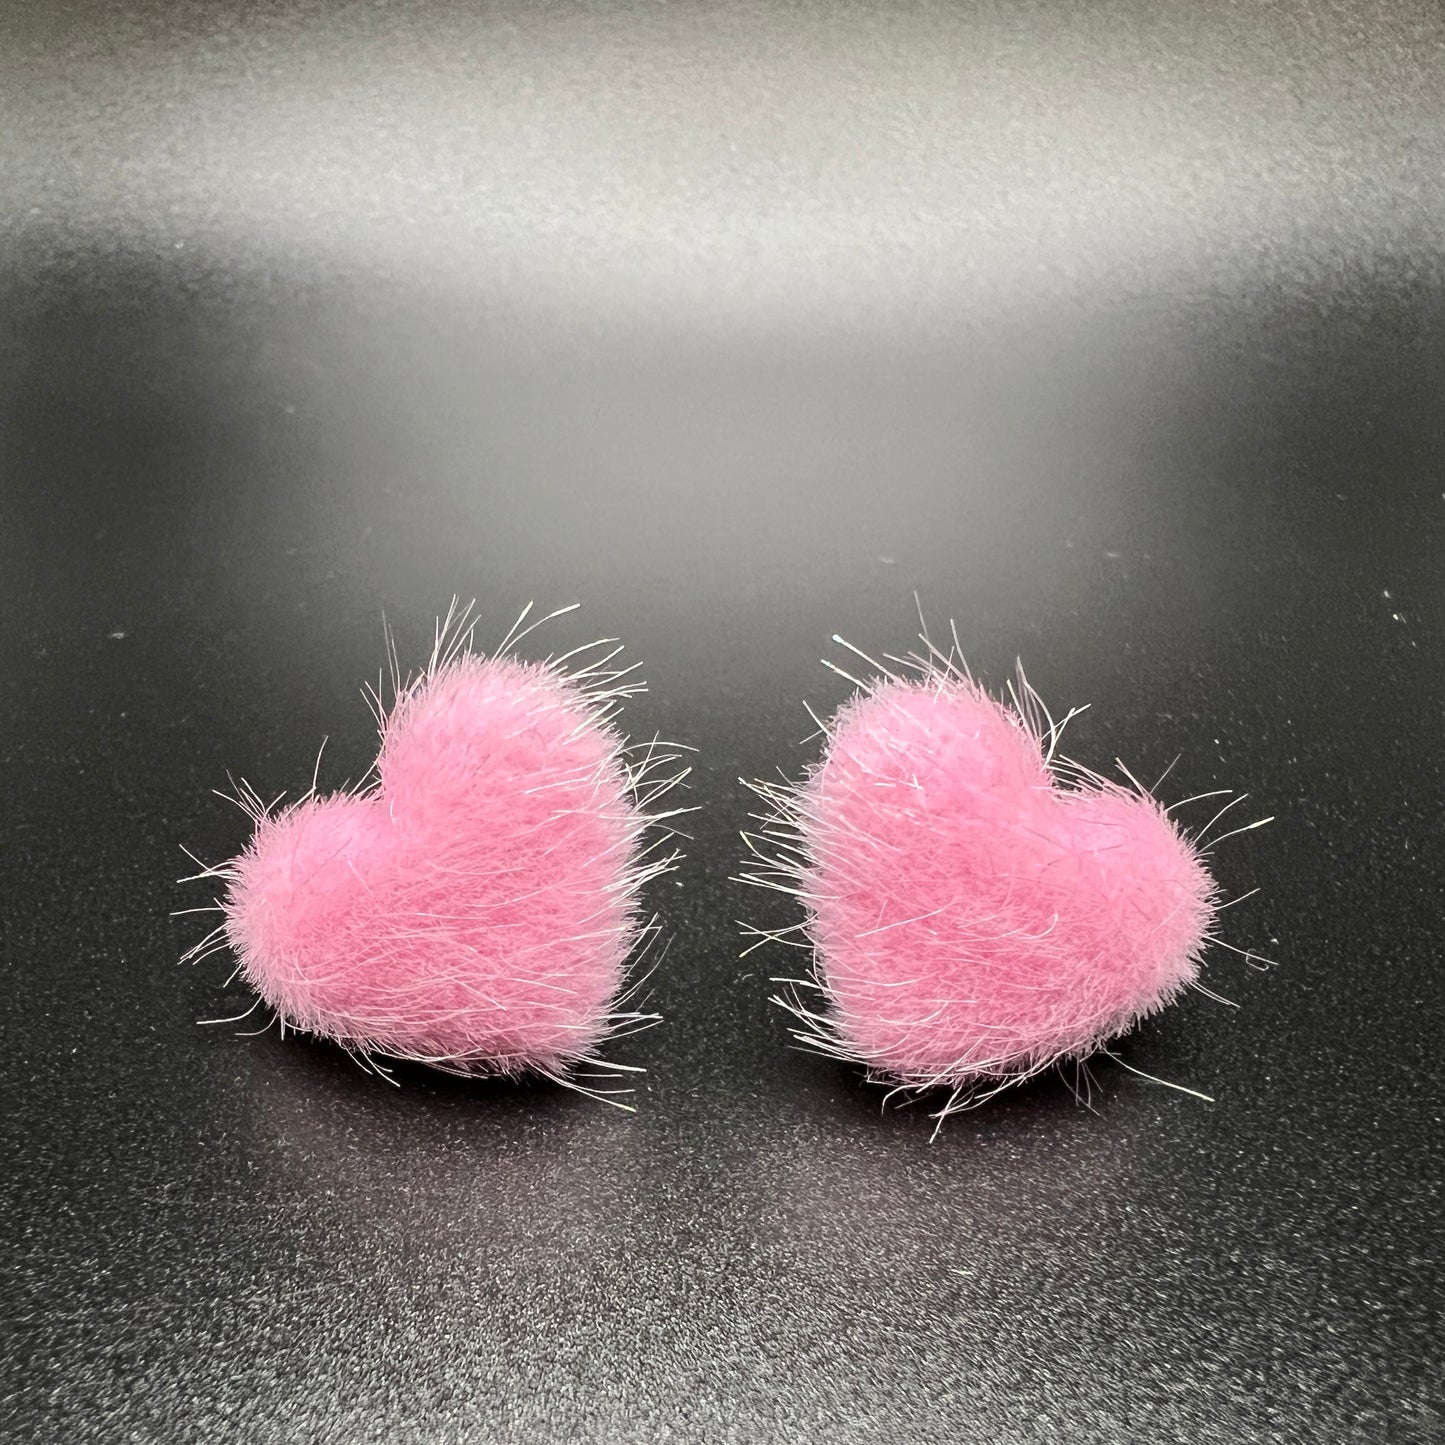 Adorable Pink Fuzzy Teddy Bear Heart Earrings – a sweet Valentine's Day gift. Handmade with love for a cozy and stylish touch. Shop now at Extra Kitsch!